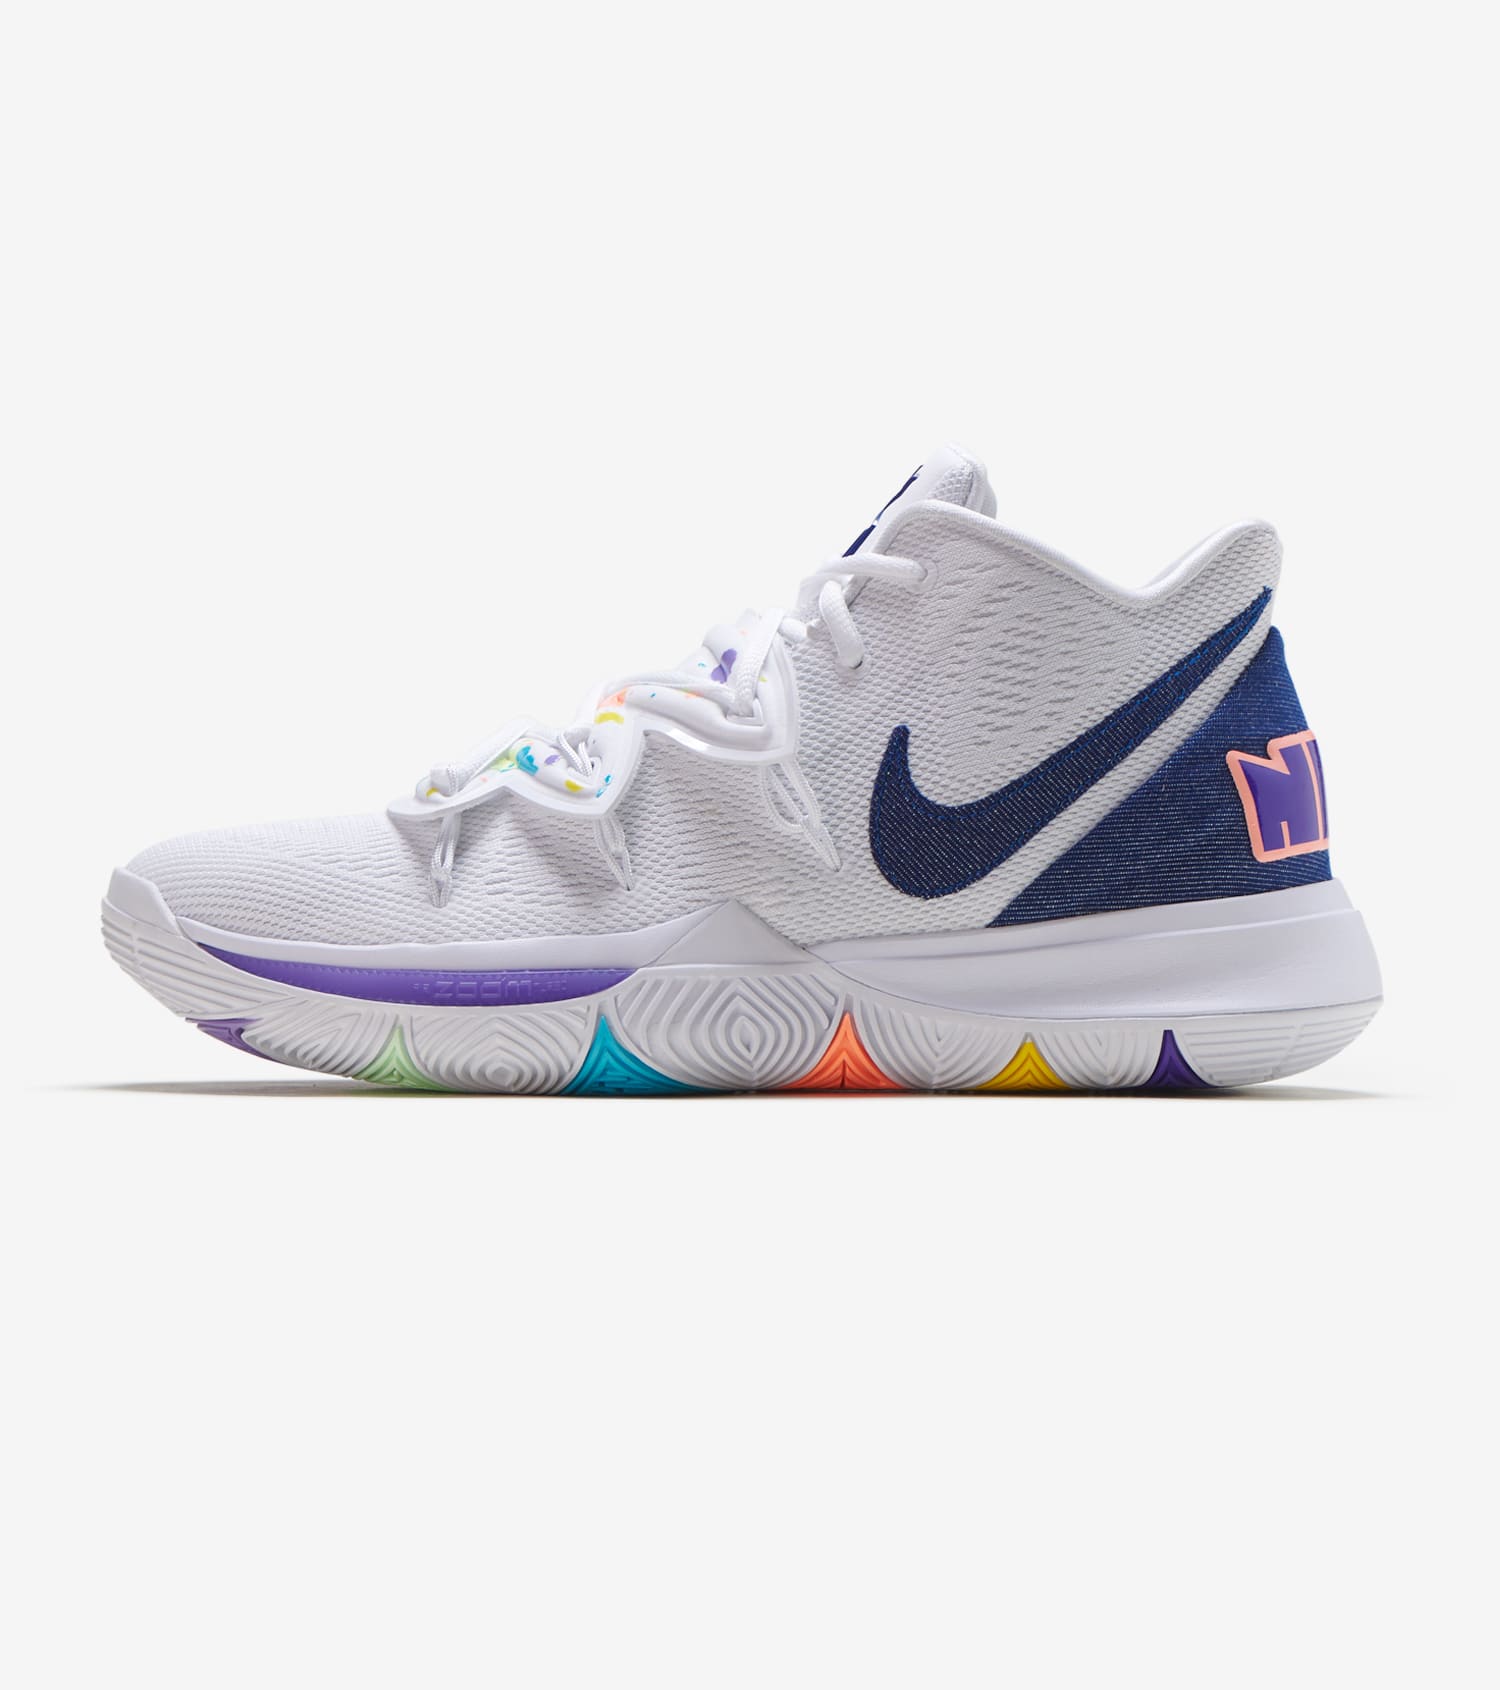 kyrie 5 size 7.5